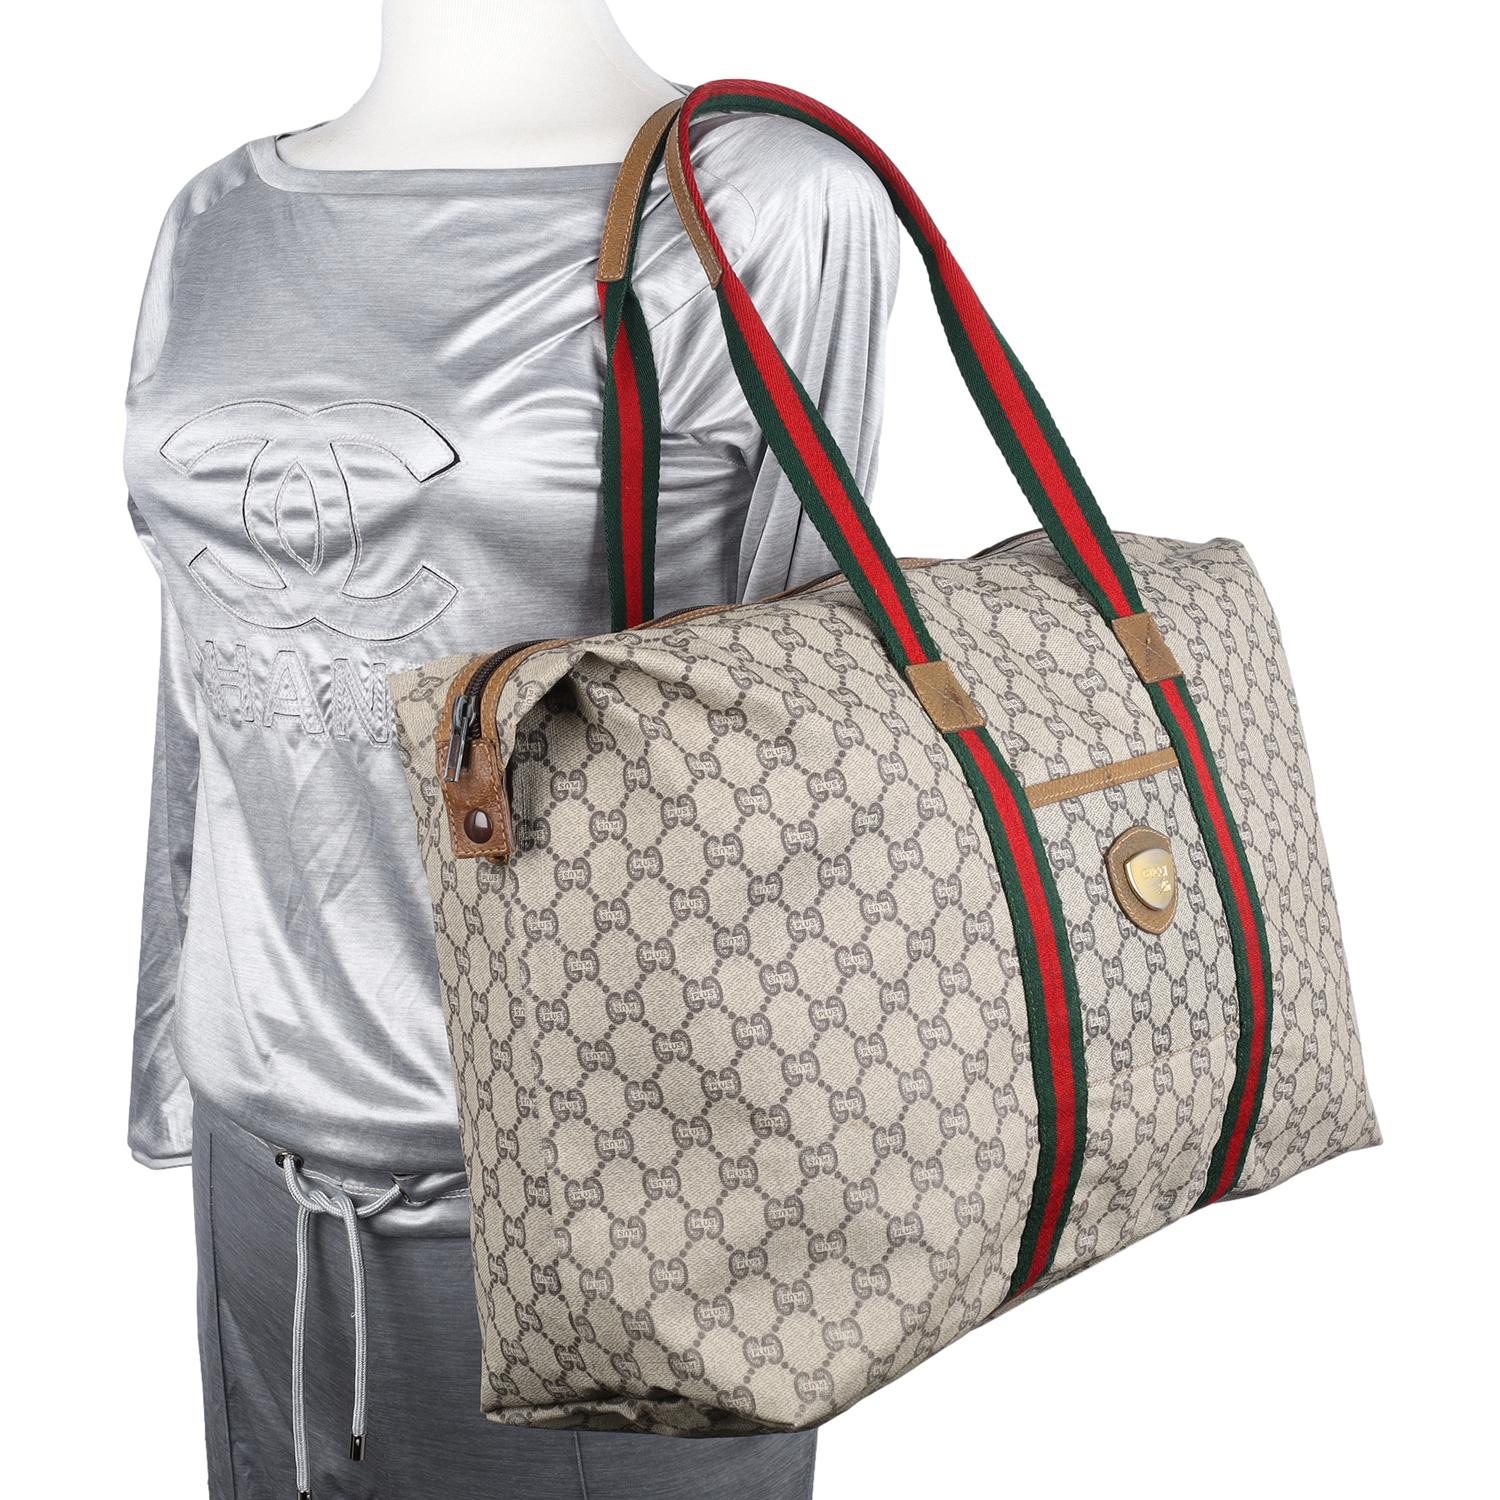 Authentic Gucci brown monogram canvas tote travel bag. Travel with an attitude with this Gucci beige and red GG Plus large tote travel bag. Features durable GG plus coated canvas with Supreme stripe and Supreme handle, zipper top closure, snap side